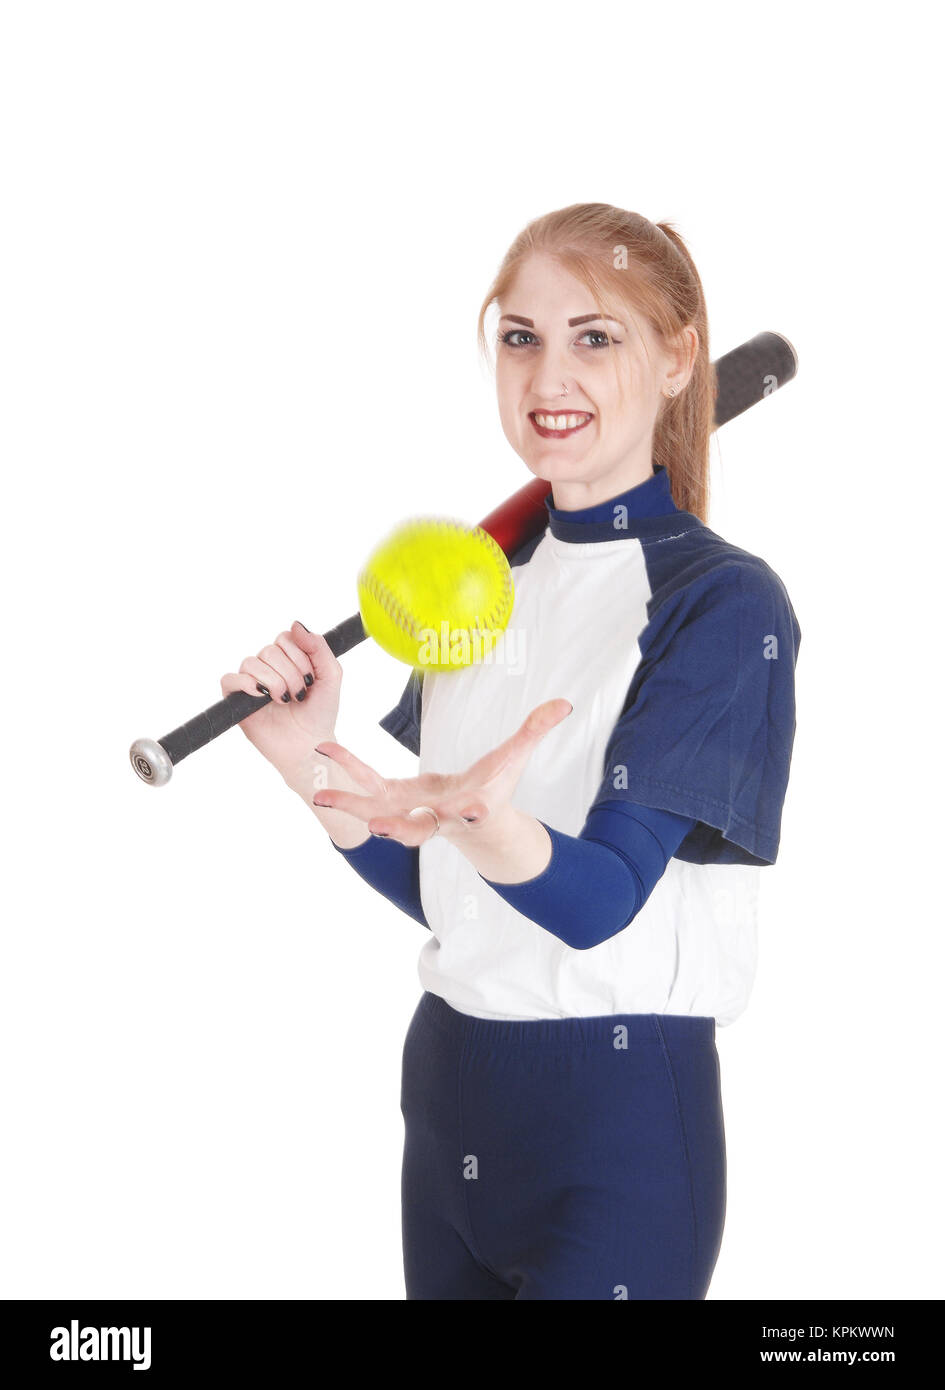 A smiling young woman standing in her blue softball uniform playing with the yellow ball holding her bat, isolated for white background Stock Photo